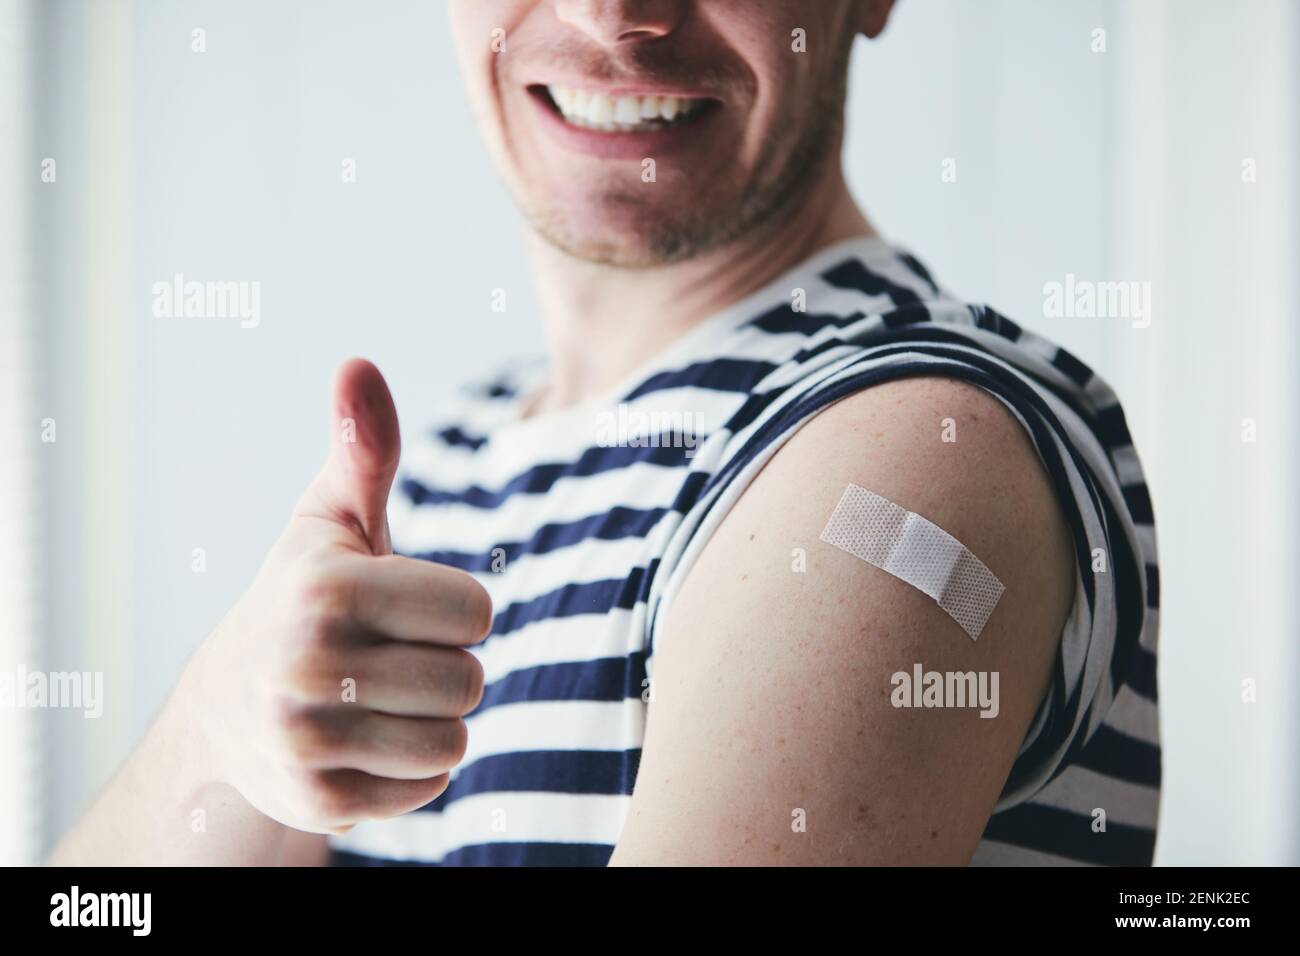 Happy young man showing thumb up and his arm after vaccination. Themes prevention, vaccine and health care during pandemic covid-19. Stock Photo